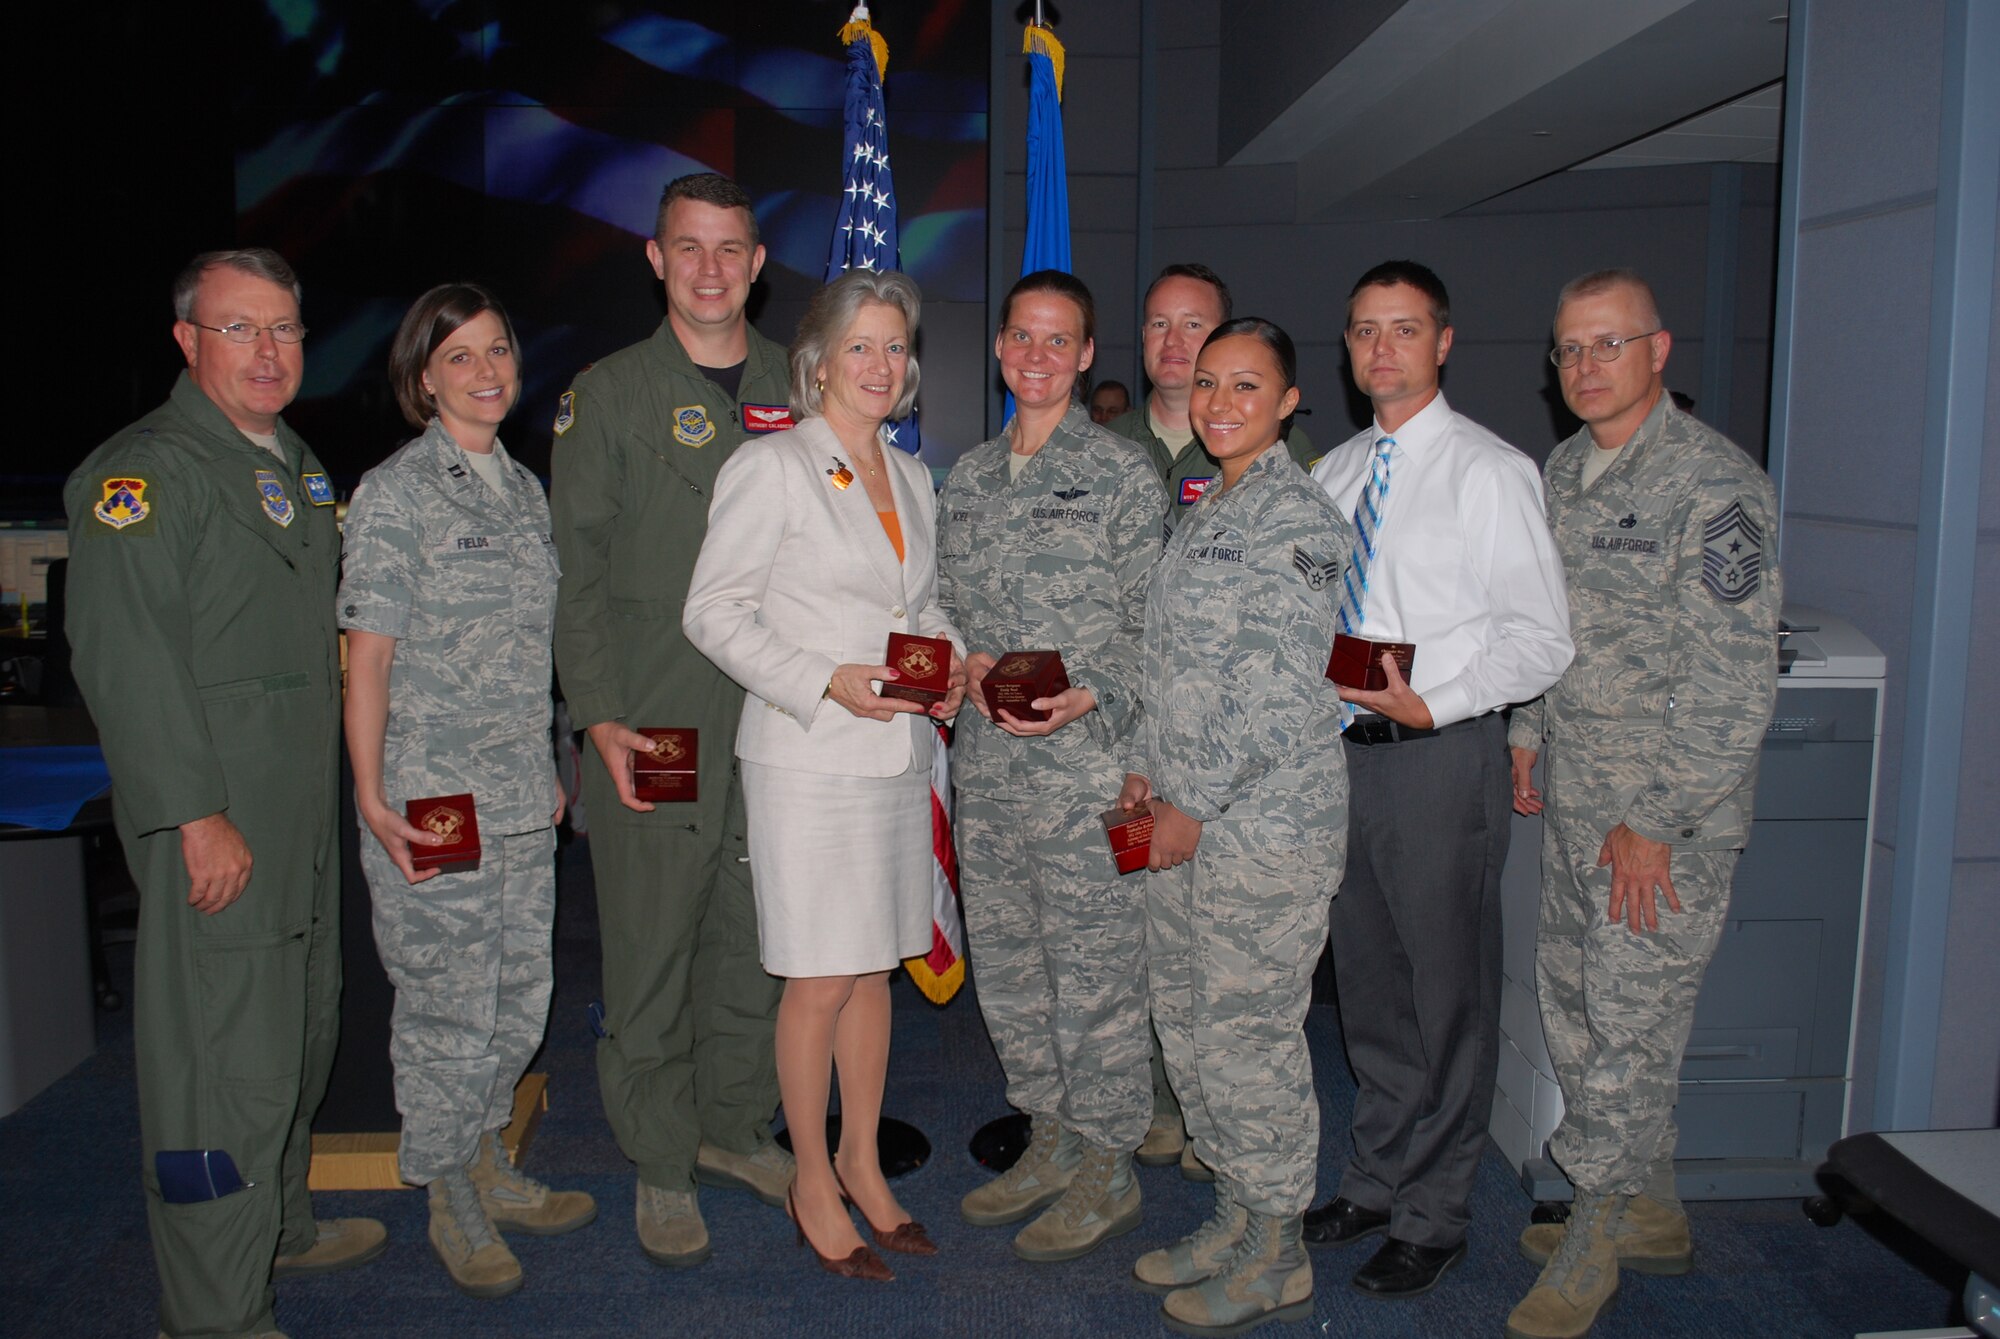 18th Air Force Vice Commander Brig Gen. Bryan Benson (far left) and18th Air Force Command Chief Chief Master Sgt. Jeffrey Williams (far right), with winners of the Headquarters, 18th Air Force Third Quarter Awards here Oct. 13. From left to right: Capt. Cynthia Fields (Company Grade Officer of the Quarter), Maj. Anthony Calabrese (Field Grade Officer of the Quarter), Barbara Jacob (Civilian of the Quarter, Category III), Master Sgt. Emily Noel (Senior NCO of the Quarter), Tech Sgt. Jason Schaub (NCO of the Quarter), Senior Airman Nathalia Robles (Junior Enlisted Member of the Quarter), and Christopher Wren (Civilian of the Quarter, Category II). (U.S. Air Force Photo by 1st Lt. Marshel Slater/Released.)